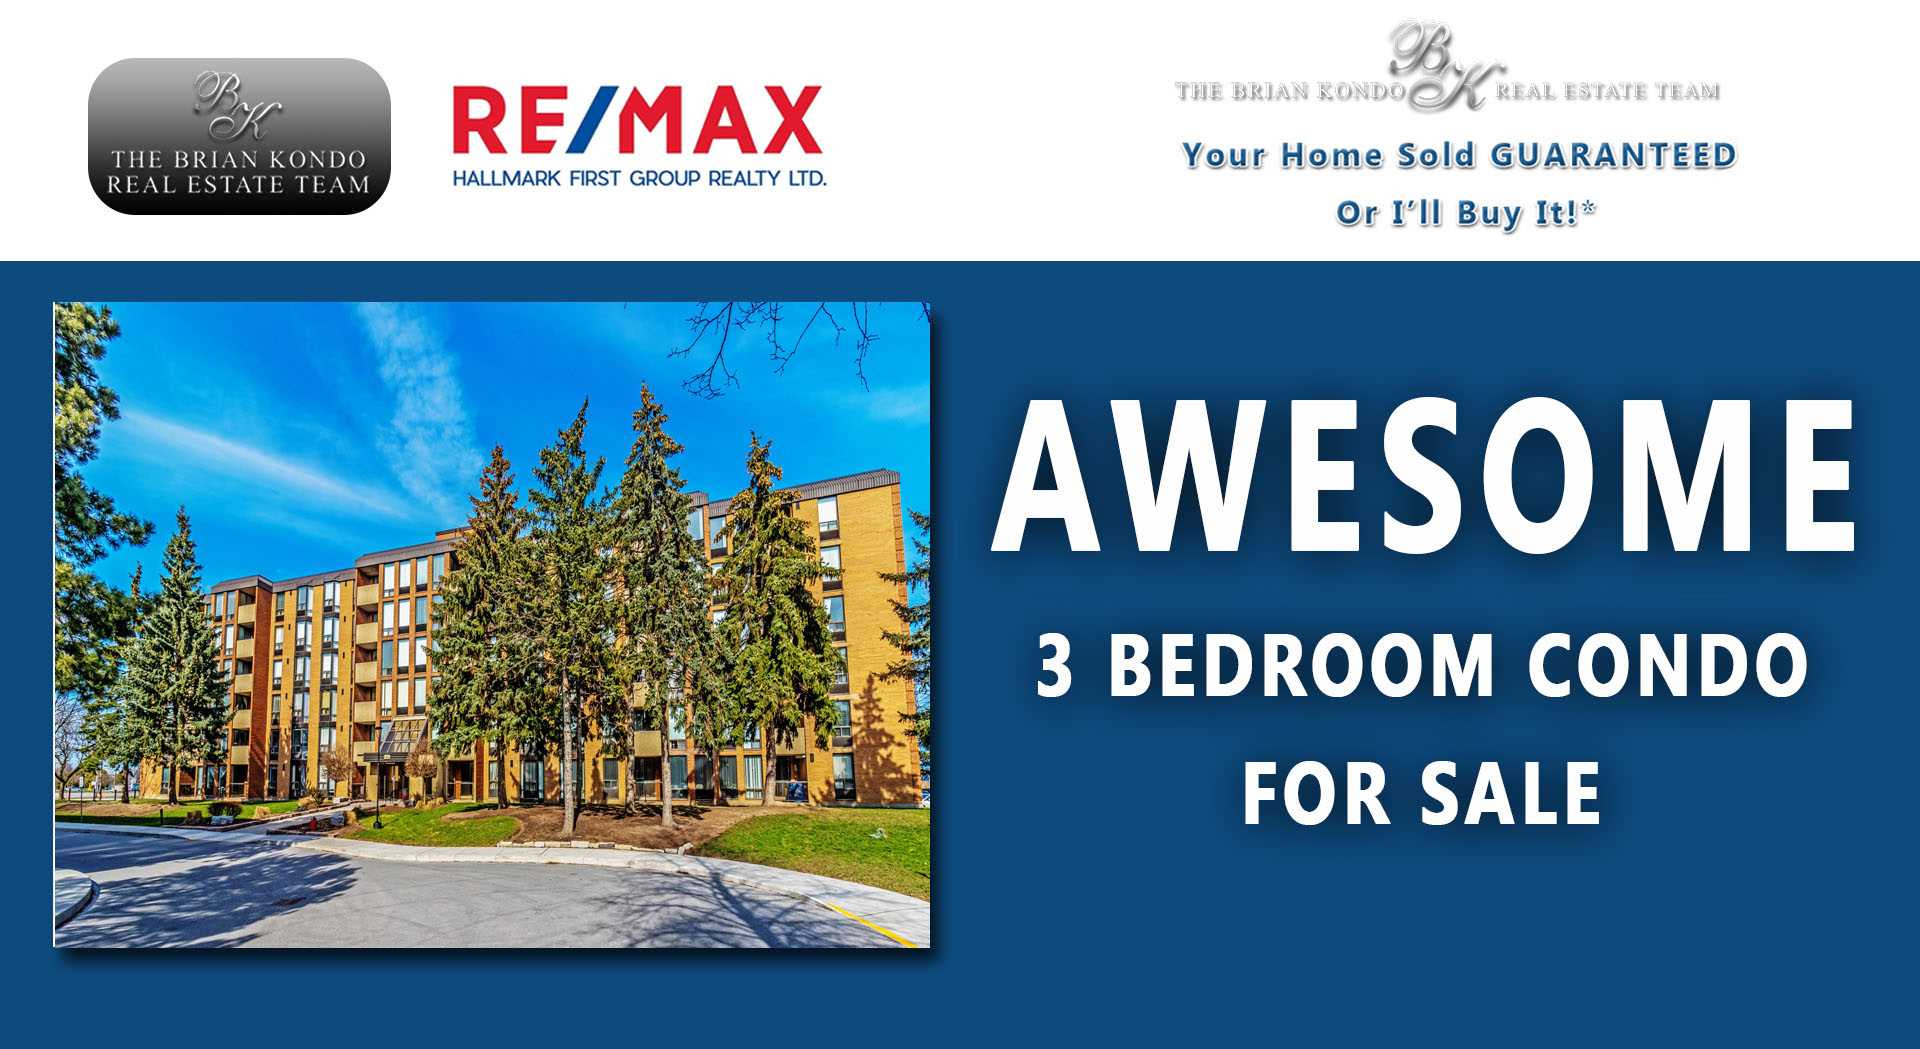 AWESOME 3 BEDROOM CONDO FOR SALE | The Brian Kondo Real Estate Team